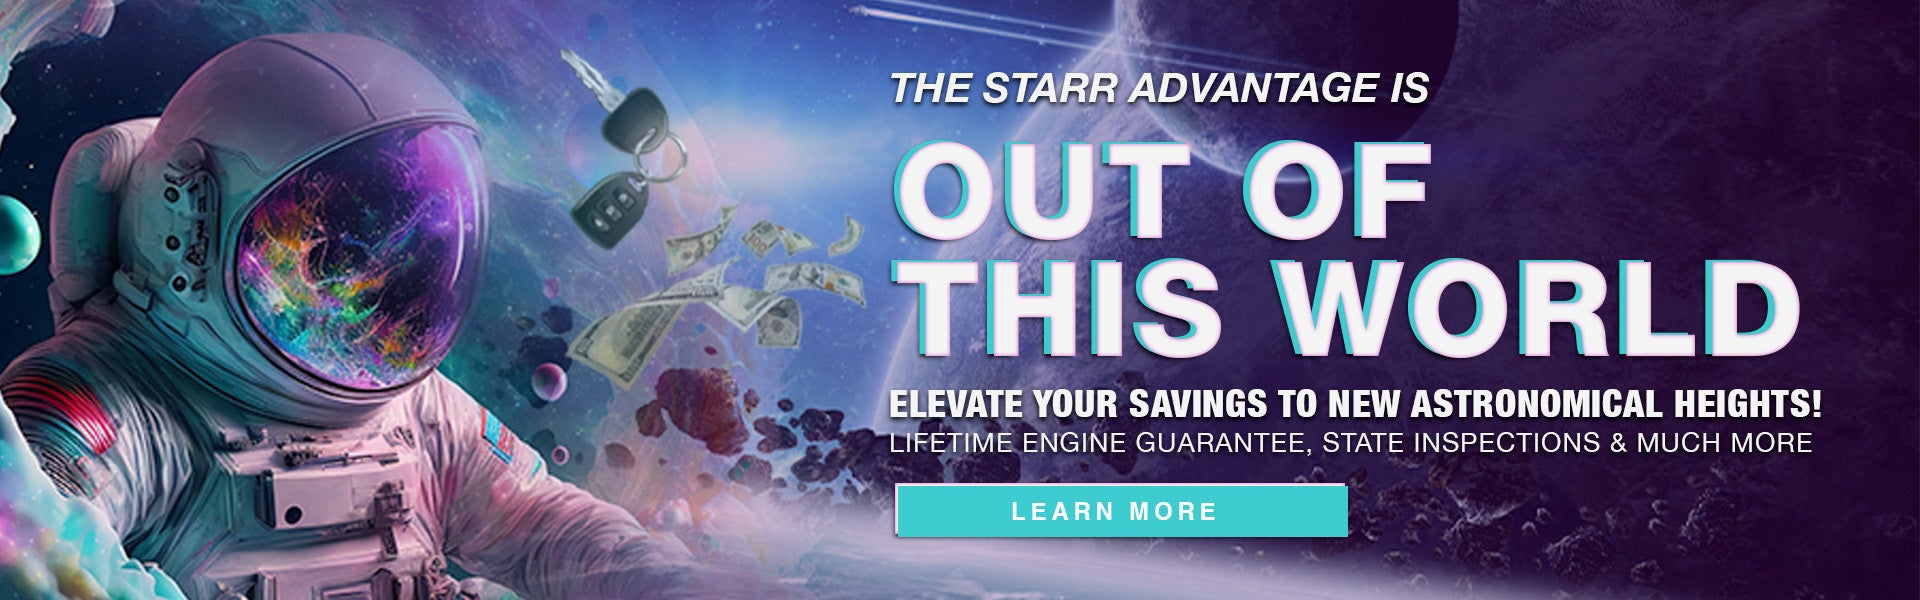 Learn More About The Starr Advantage